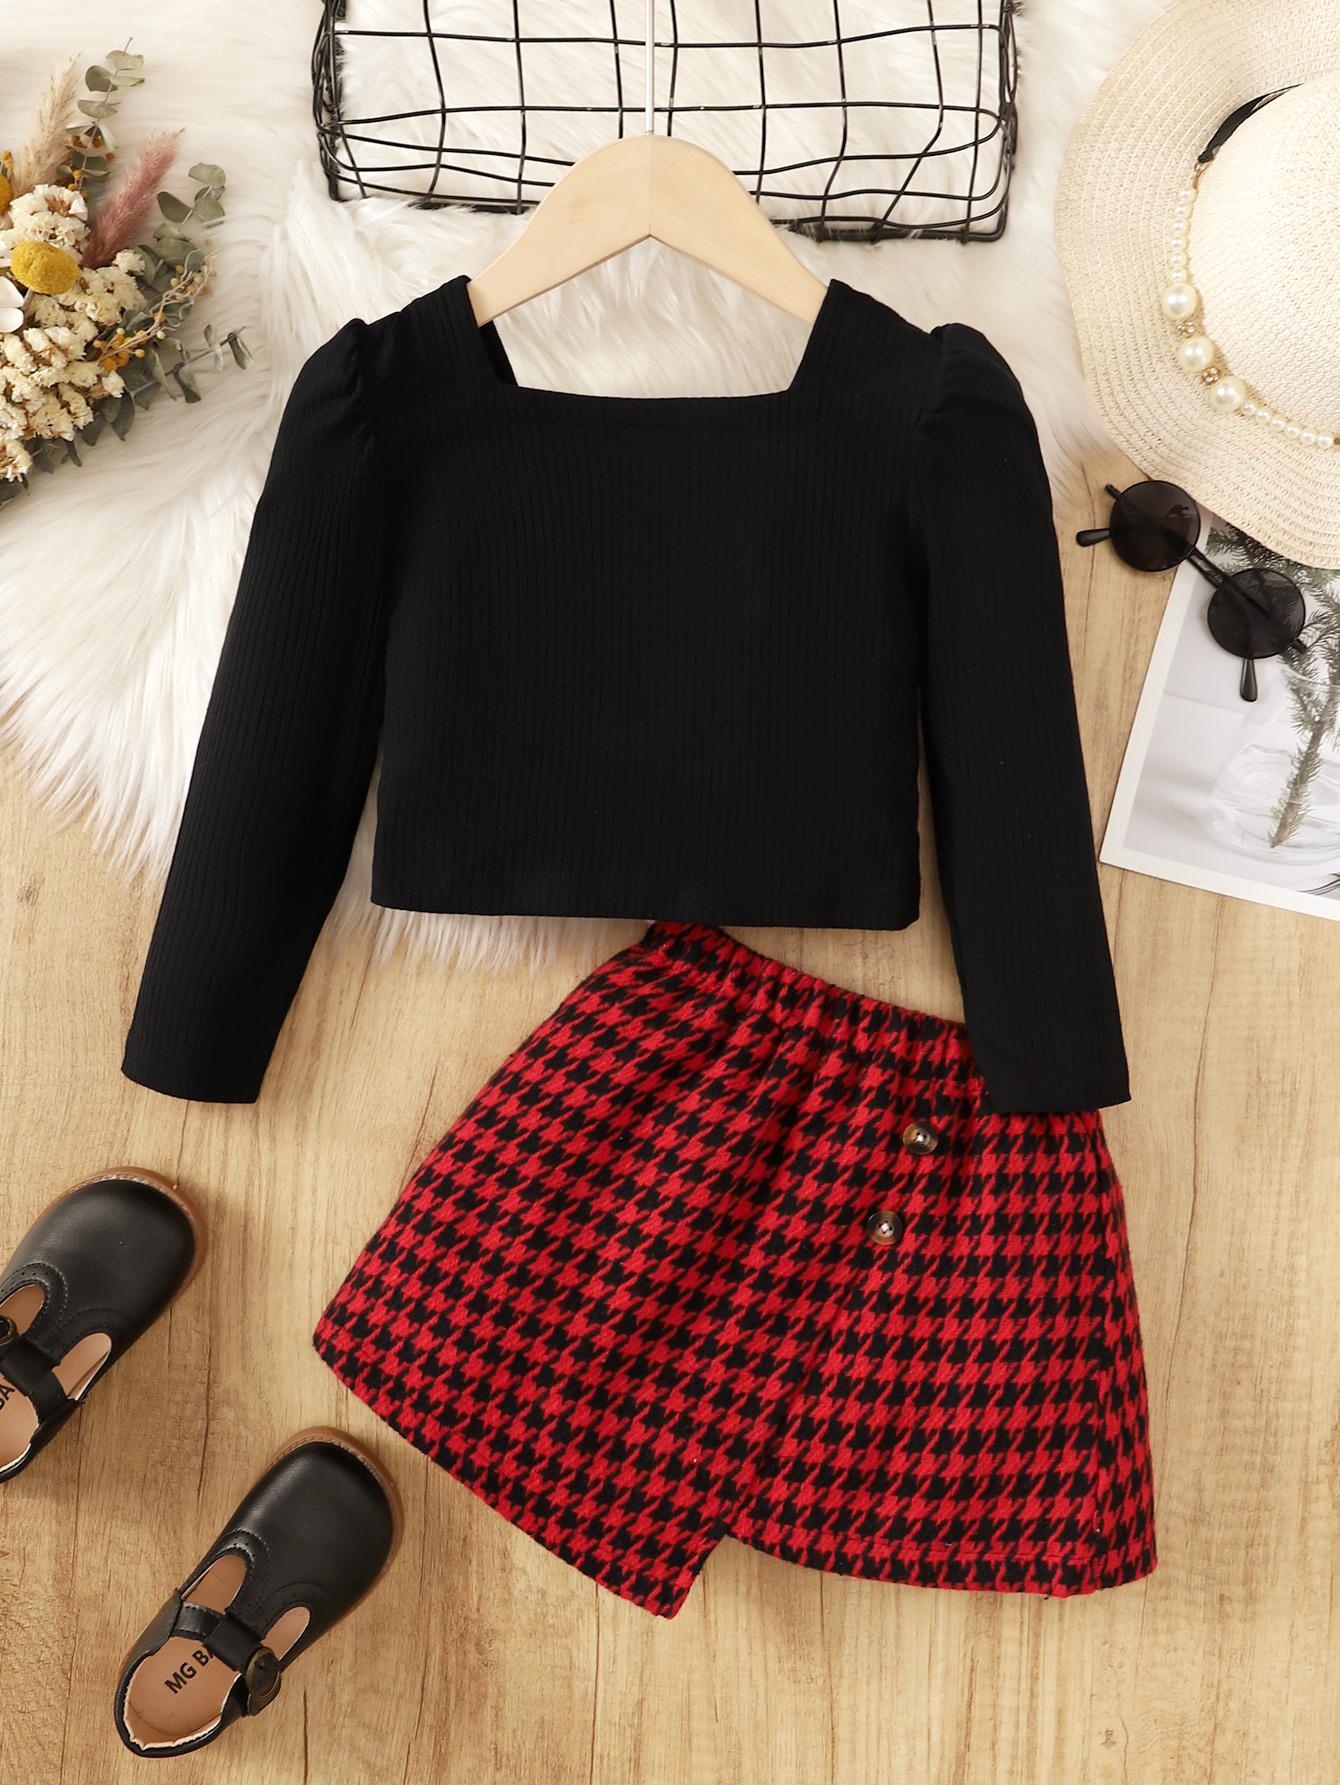 2-7Y Ready Stock Kids Girls Skirts Sets Knitted Long Sleeve Pure Color Tops Asymmetrical Houndstooth Skirts Spring Autumn 2Pcs Clothing From 2Y-7Y Black Catpapa  462308161